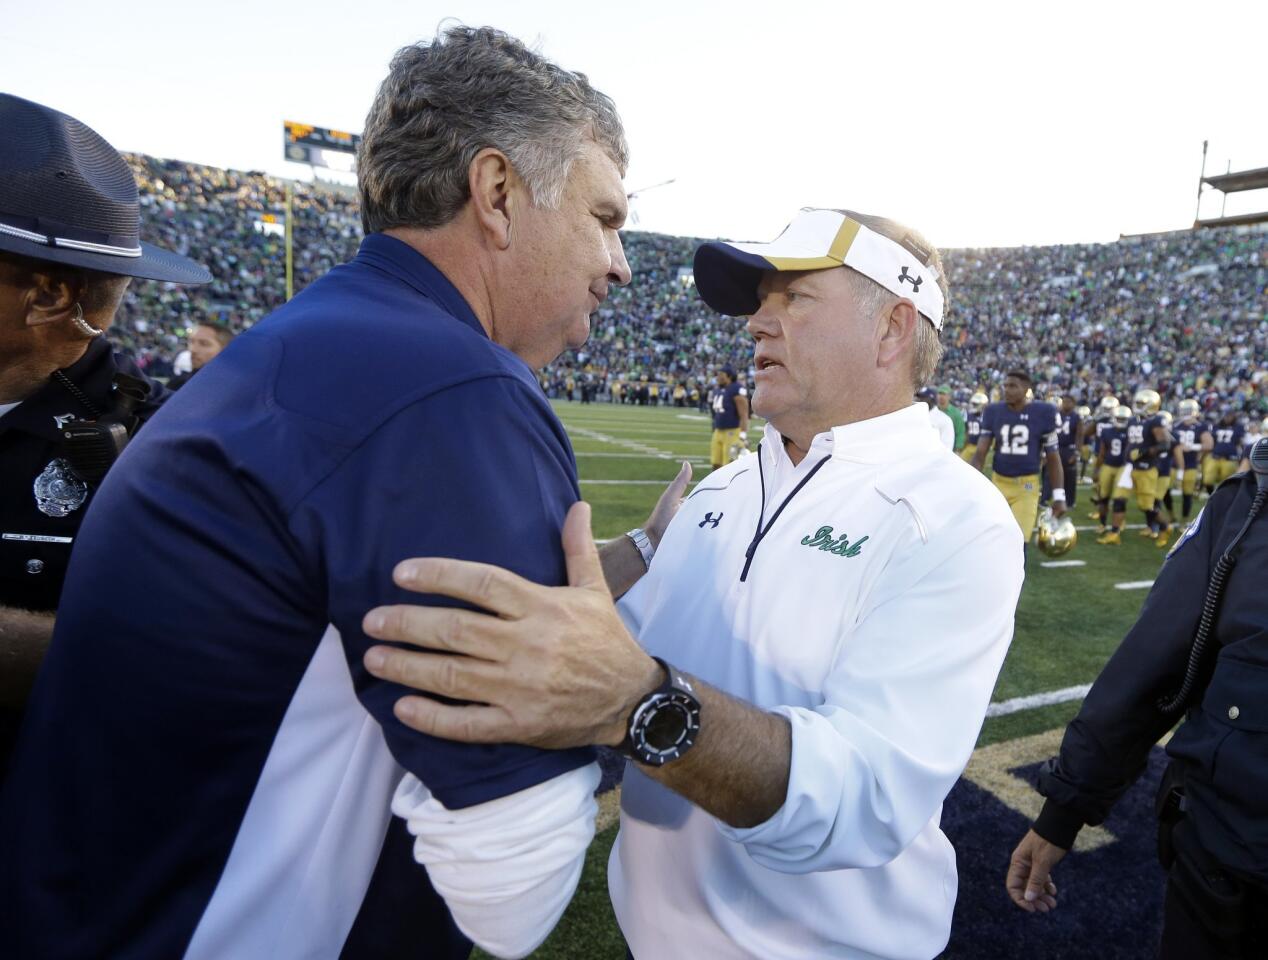 Notre Dame coach Brian Kelly is greeted by Georgia Tech coach Paul Johnson following the game.